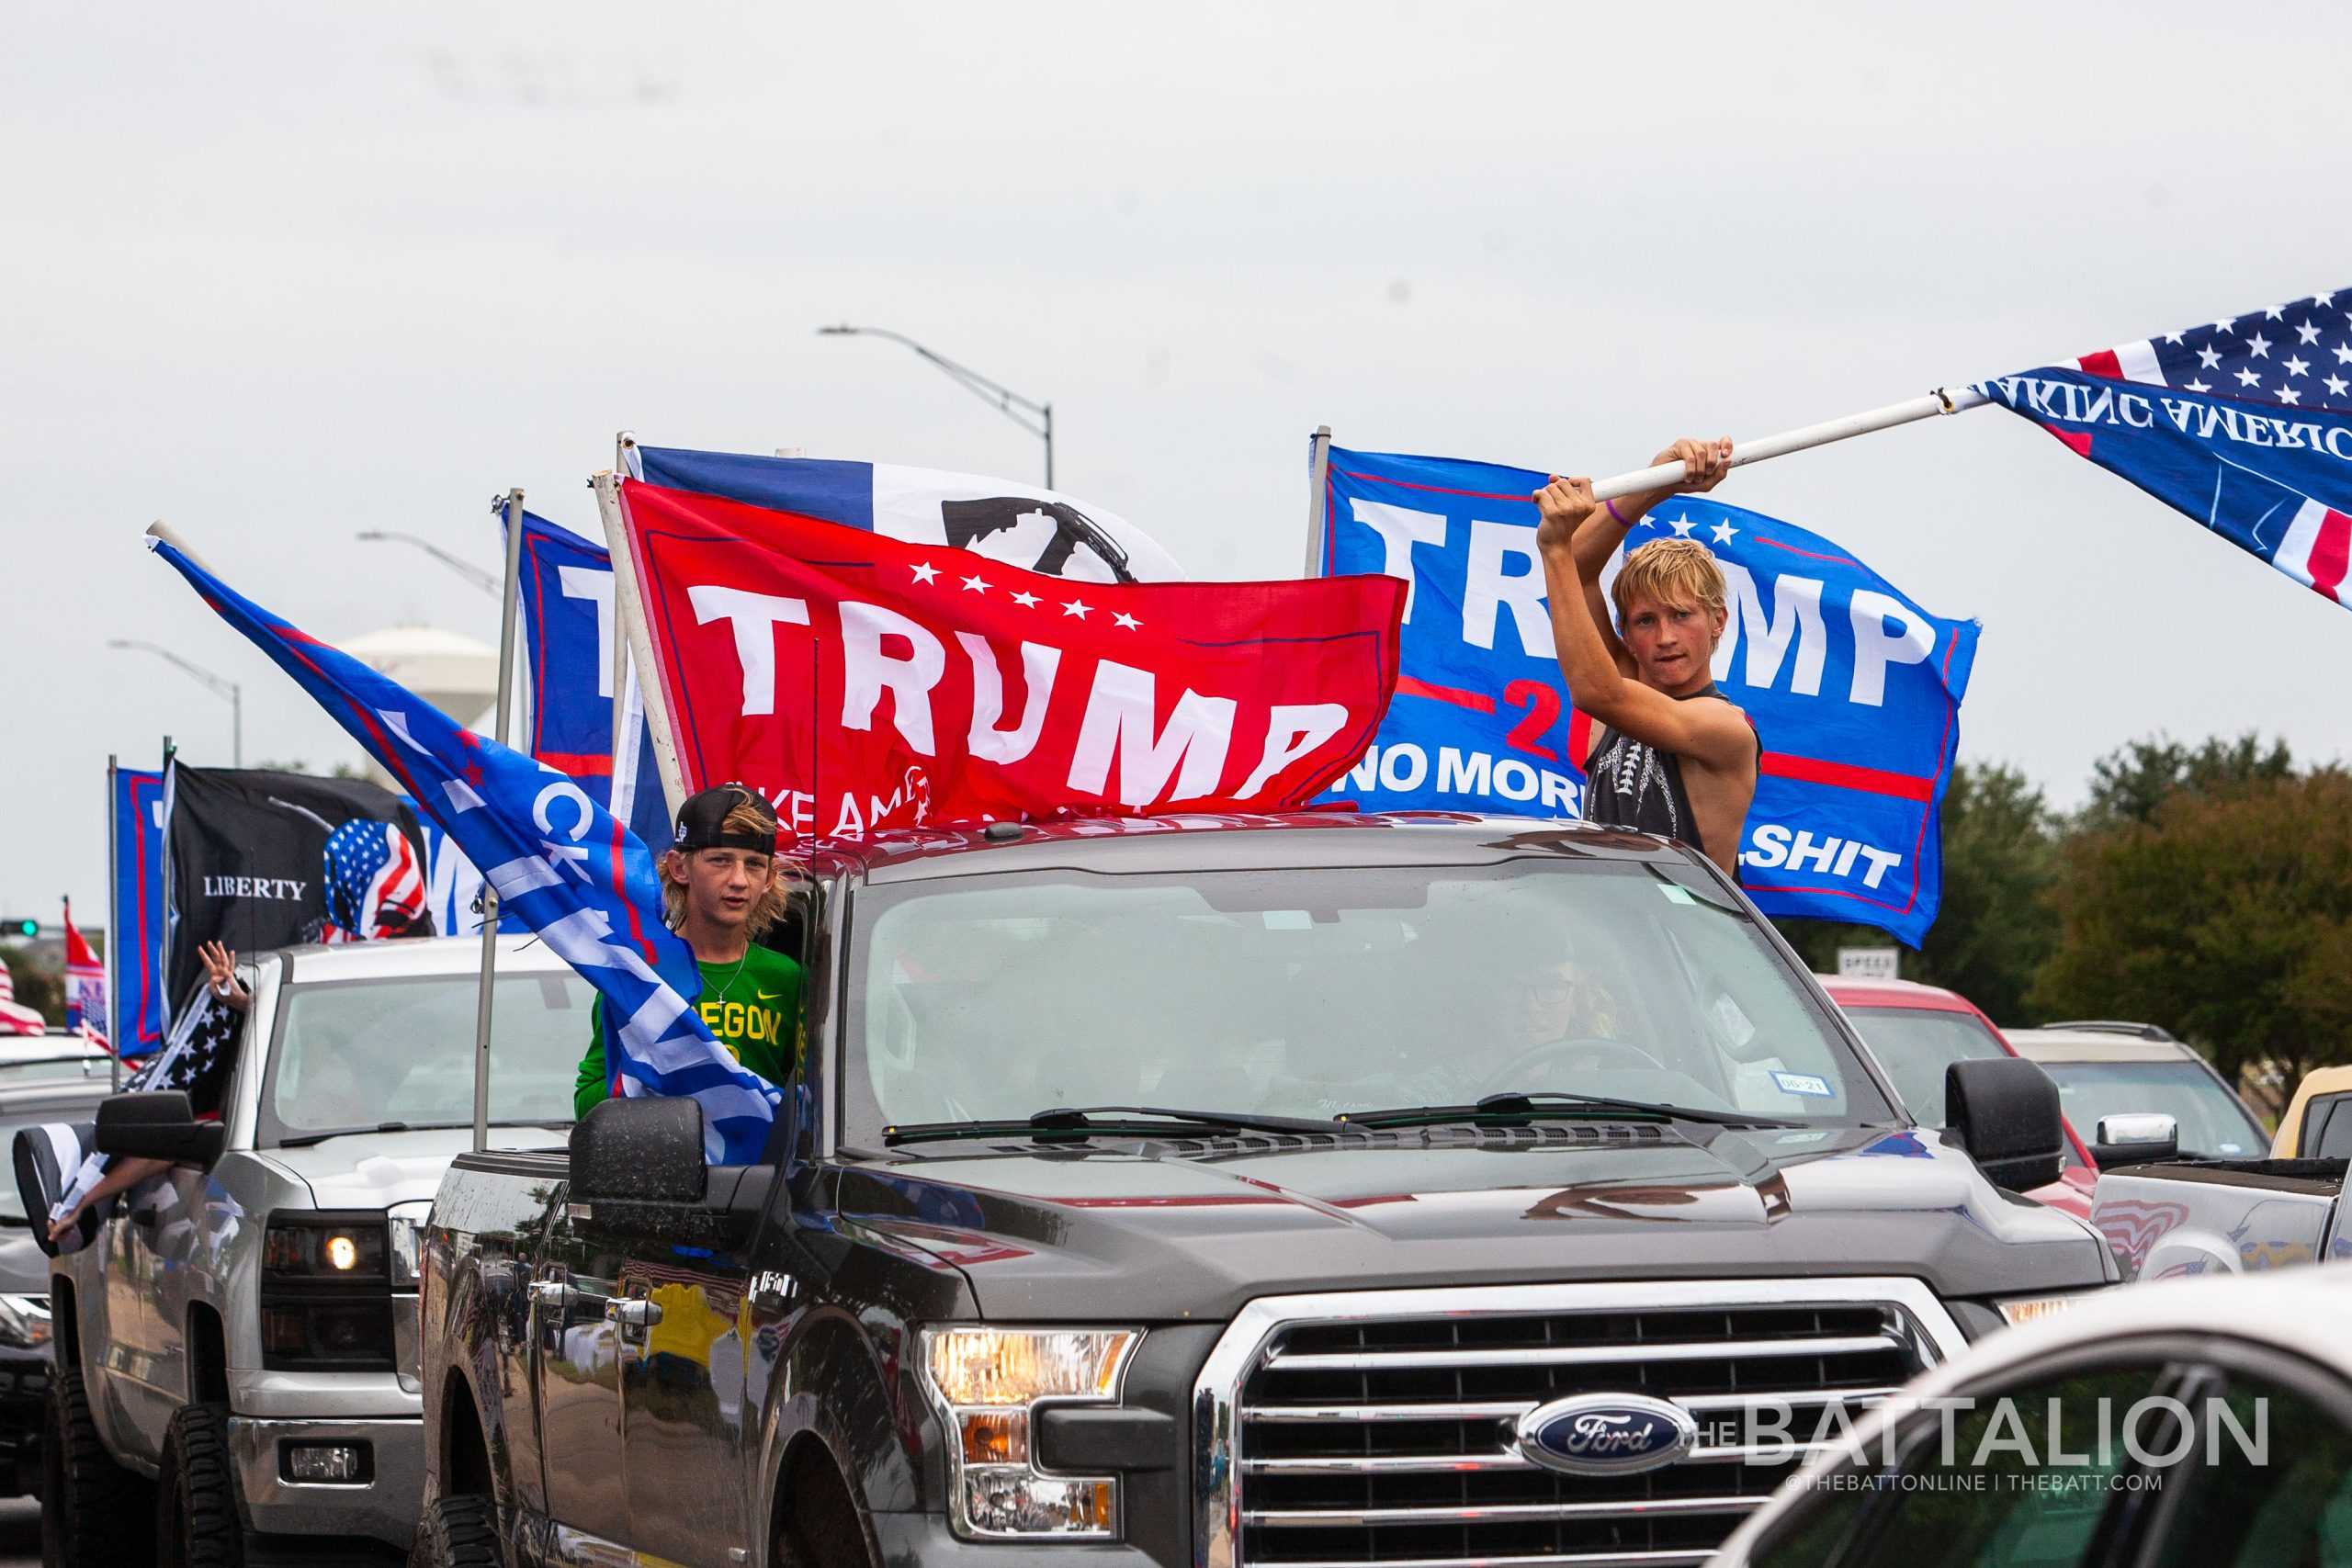 Over+100+cars+gather+for+Trump+parade+in+College+Station